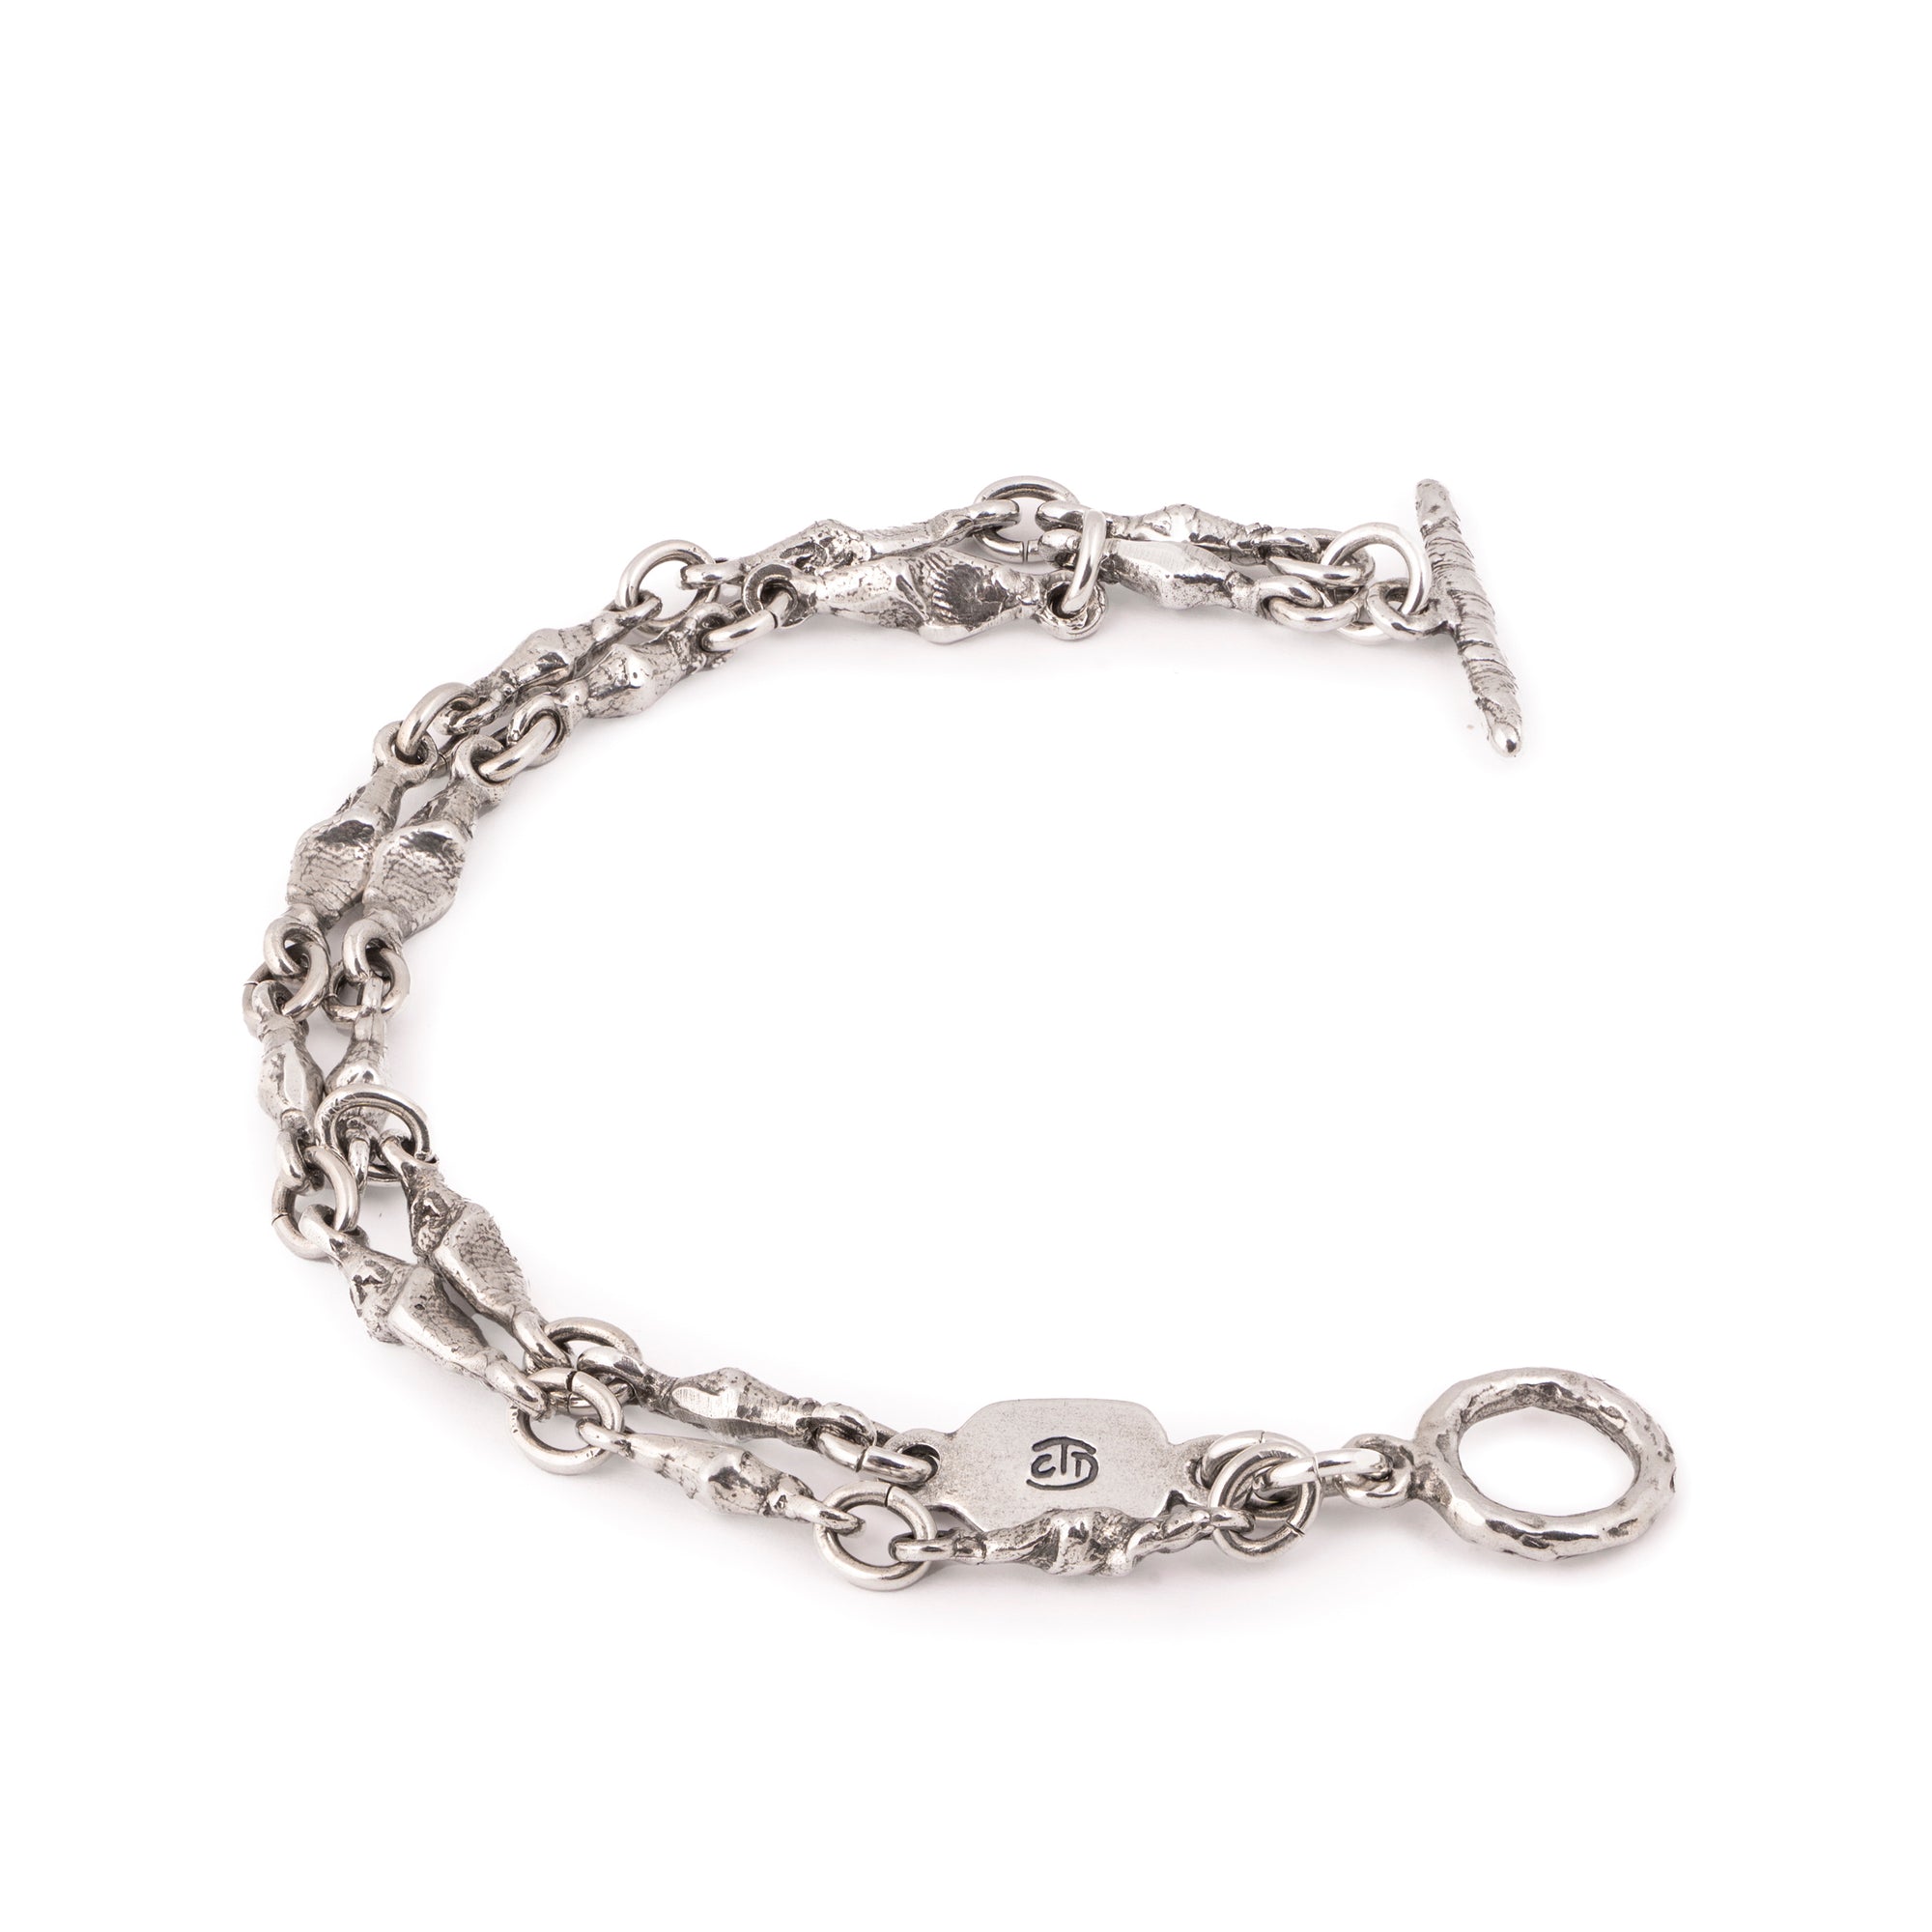 Silver Sculptural Chain Bracelet "The Links of Life"